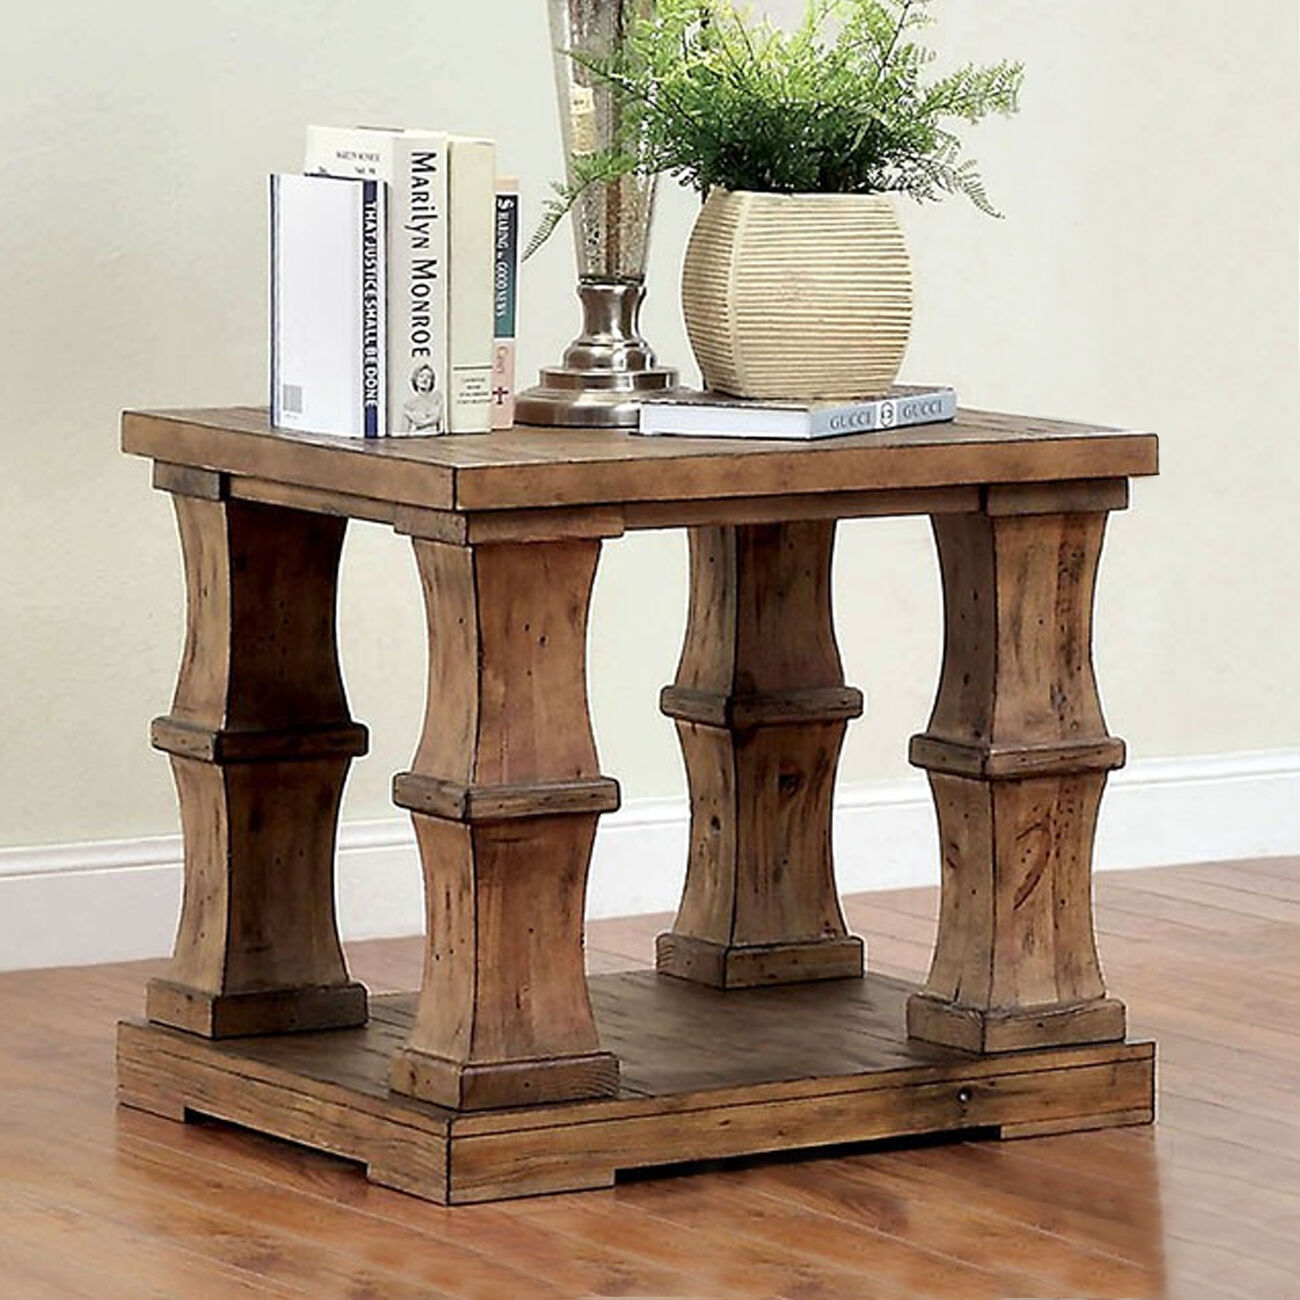 Granard Transitional End Table In Natural Tone